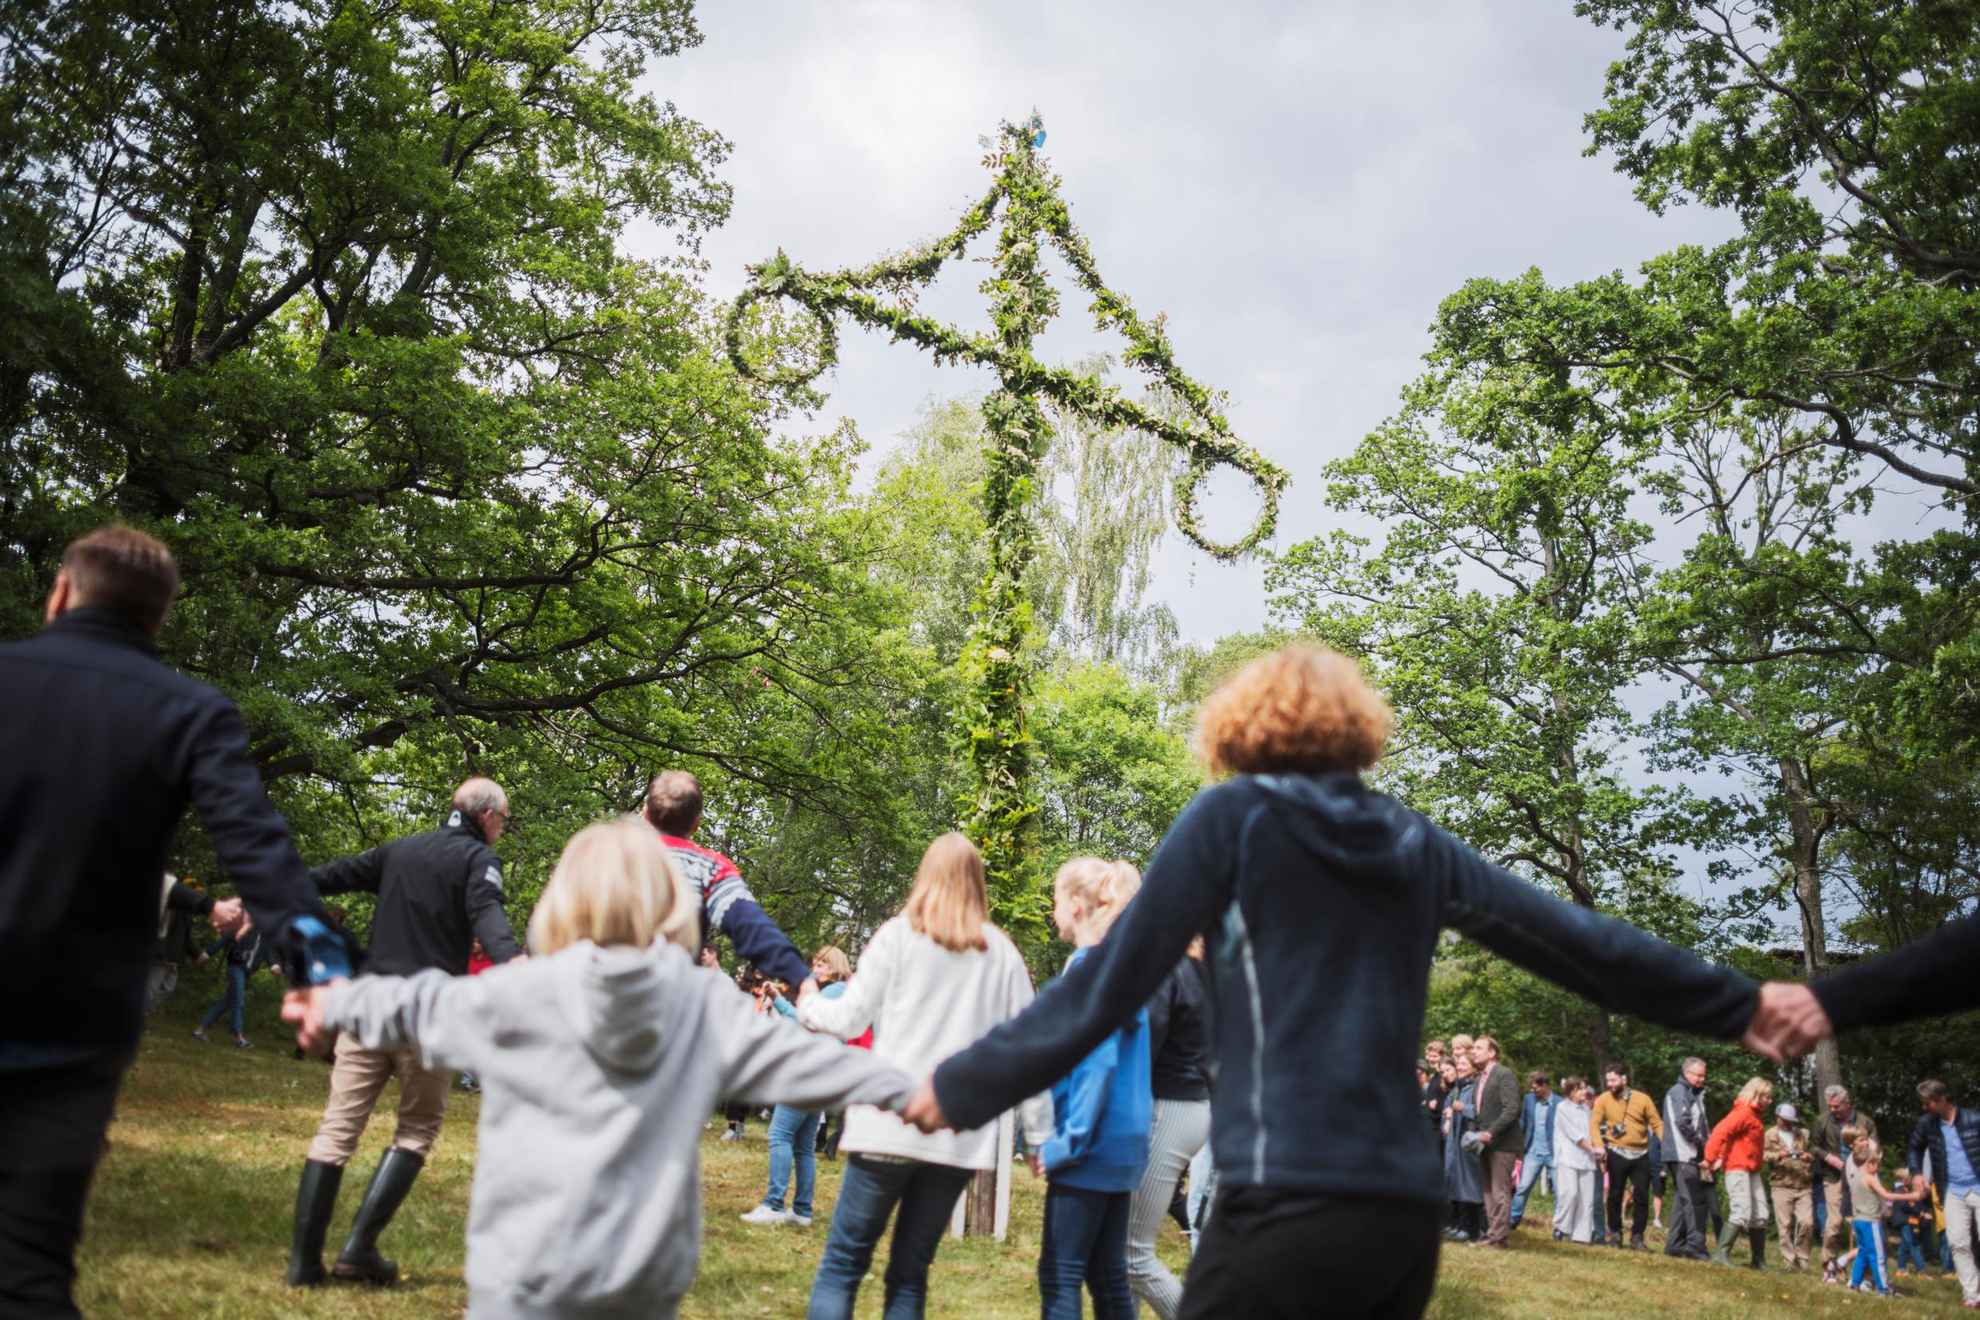 Kids and adults are holding hands and dancing around a midsummer pole. A midsummer pole is a large pole stuck into the ground with a shorter cross bar from which hangs two wreaths.